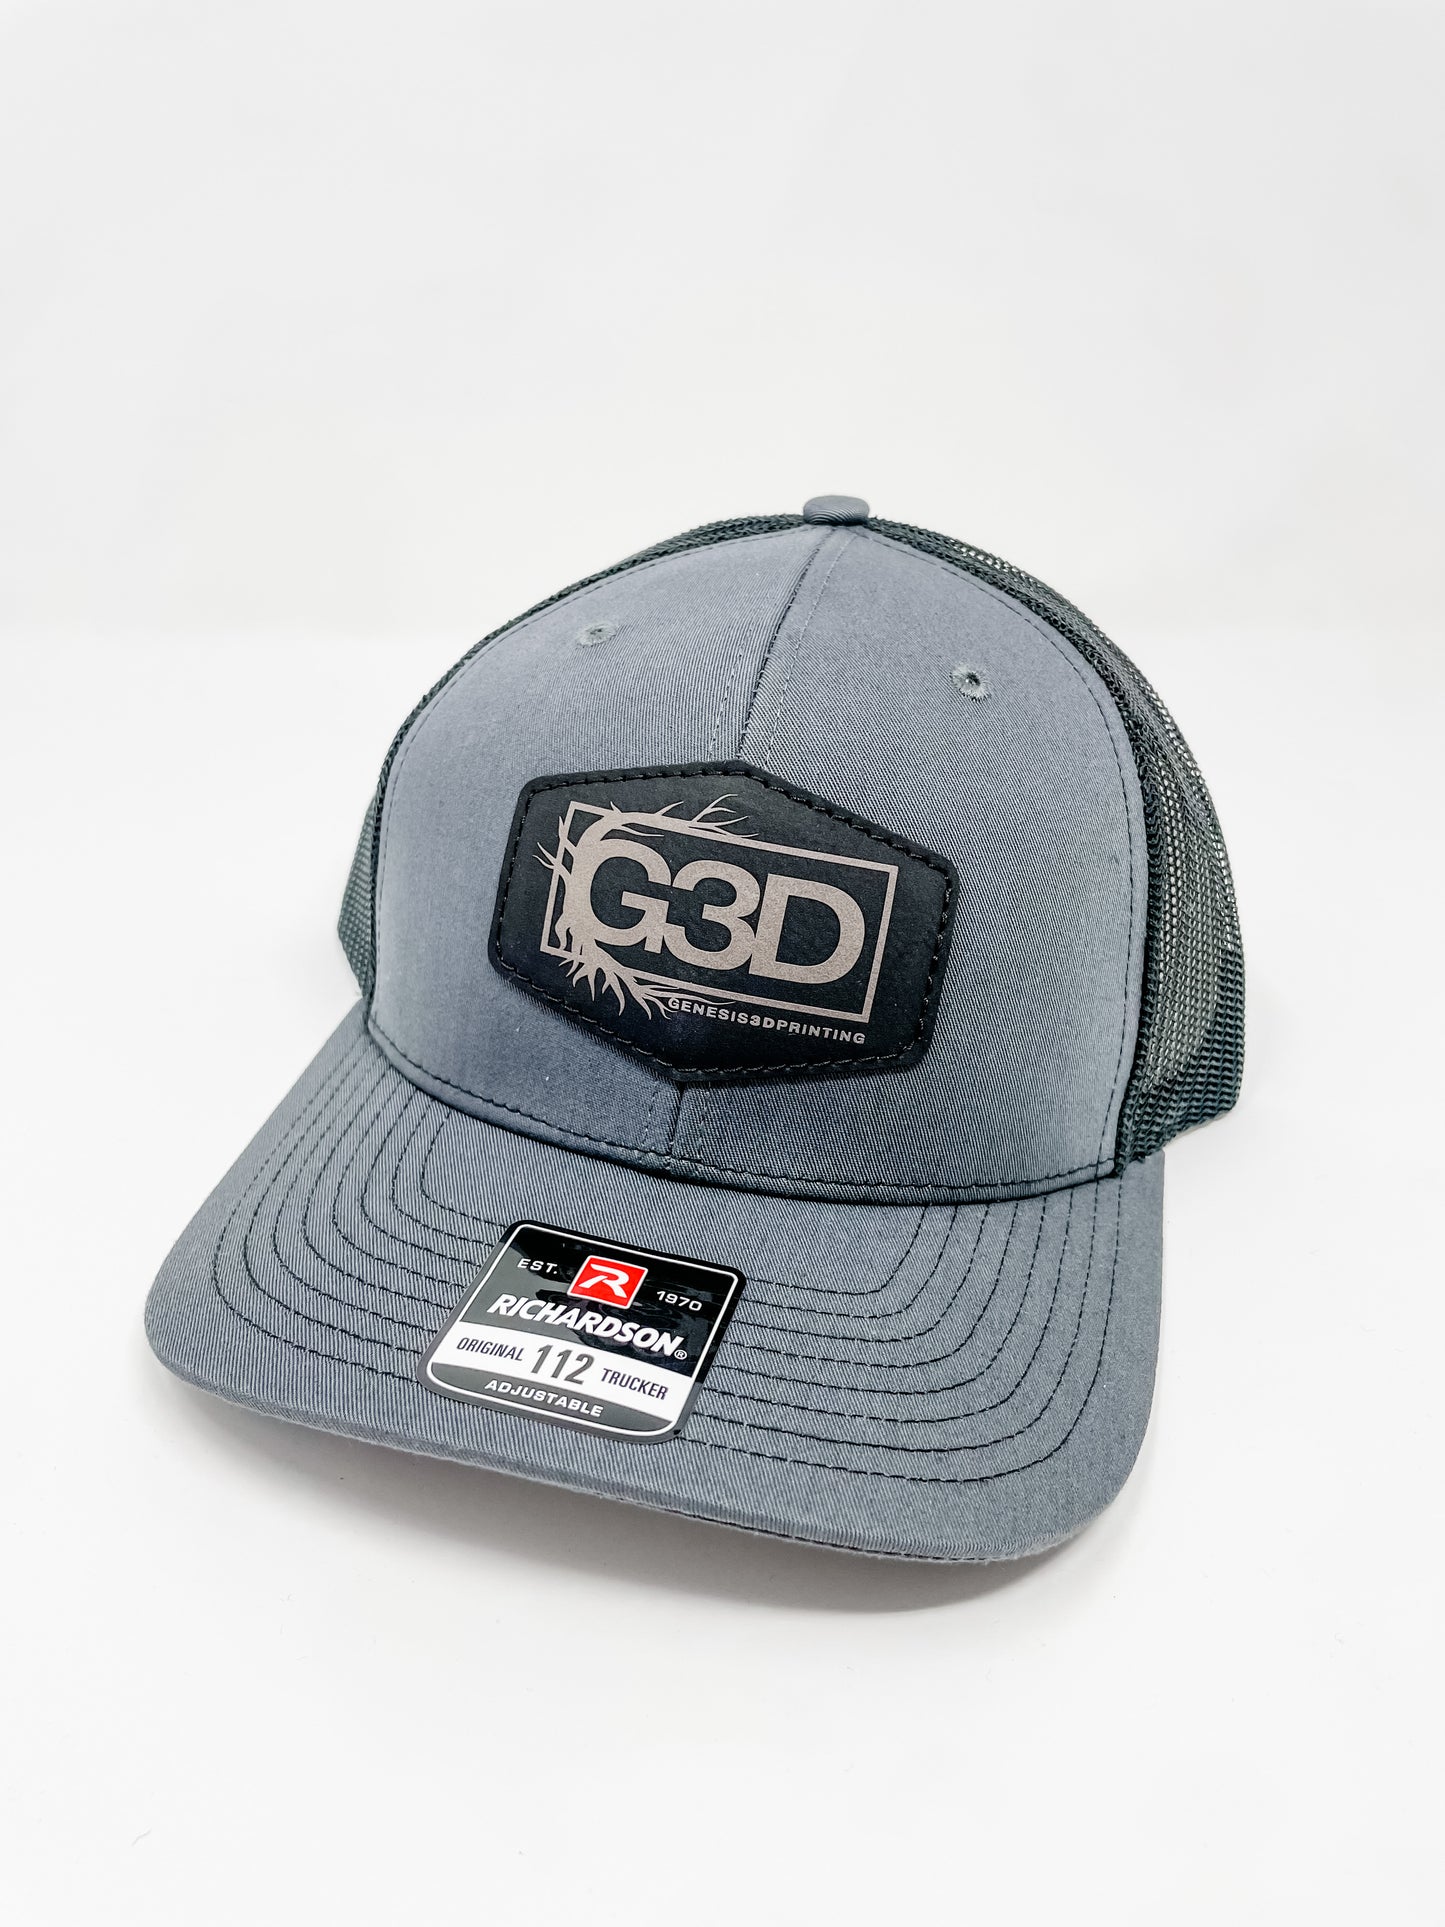 G3D Leather Patch Hat [Charcoal and Black] – Genesis 3D Printing, LLC